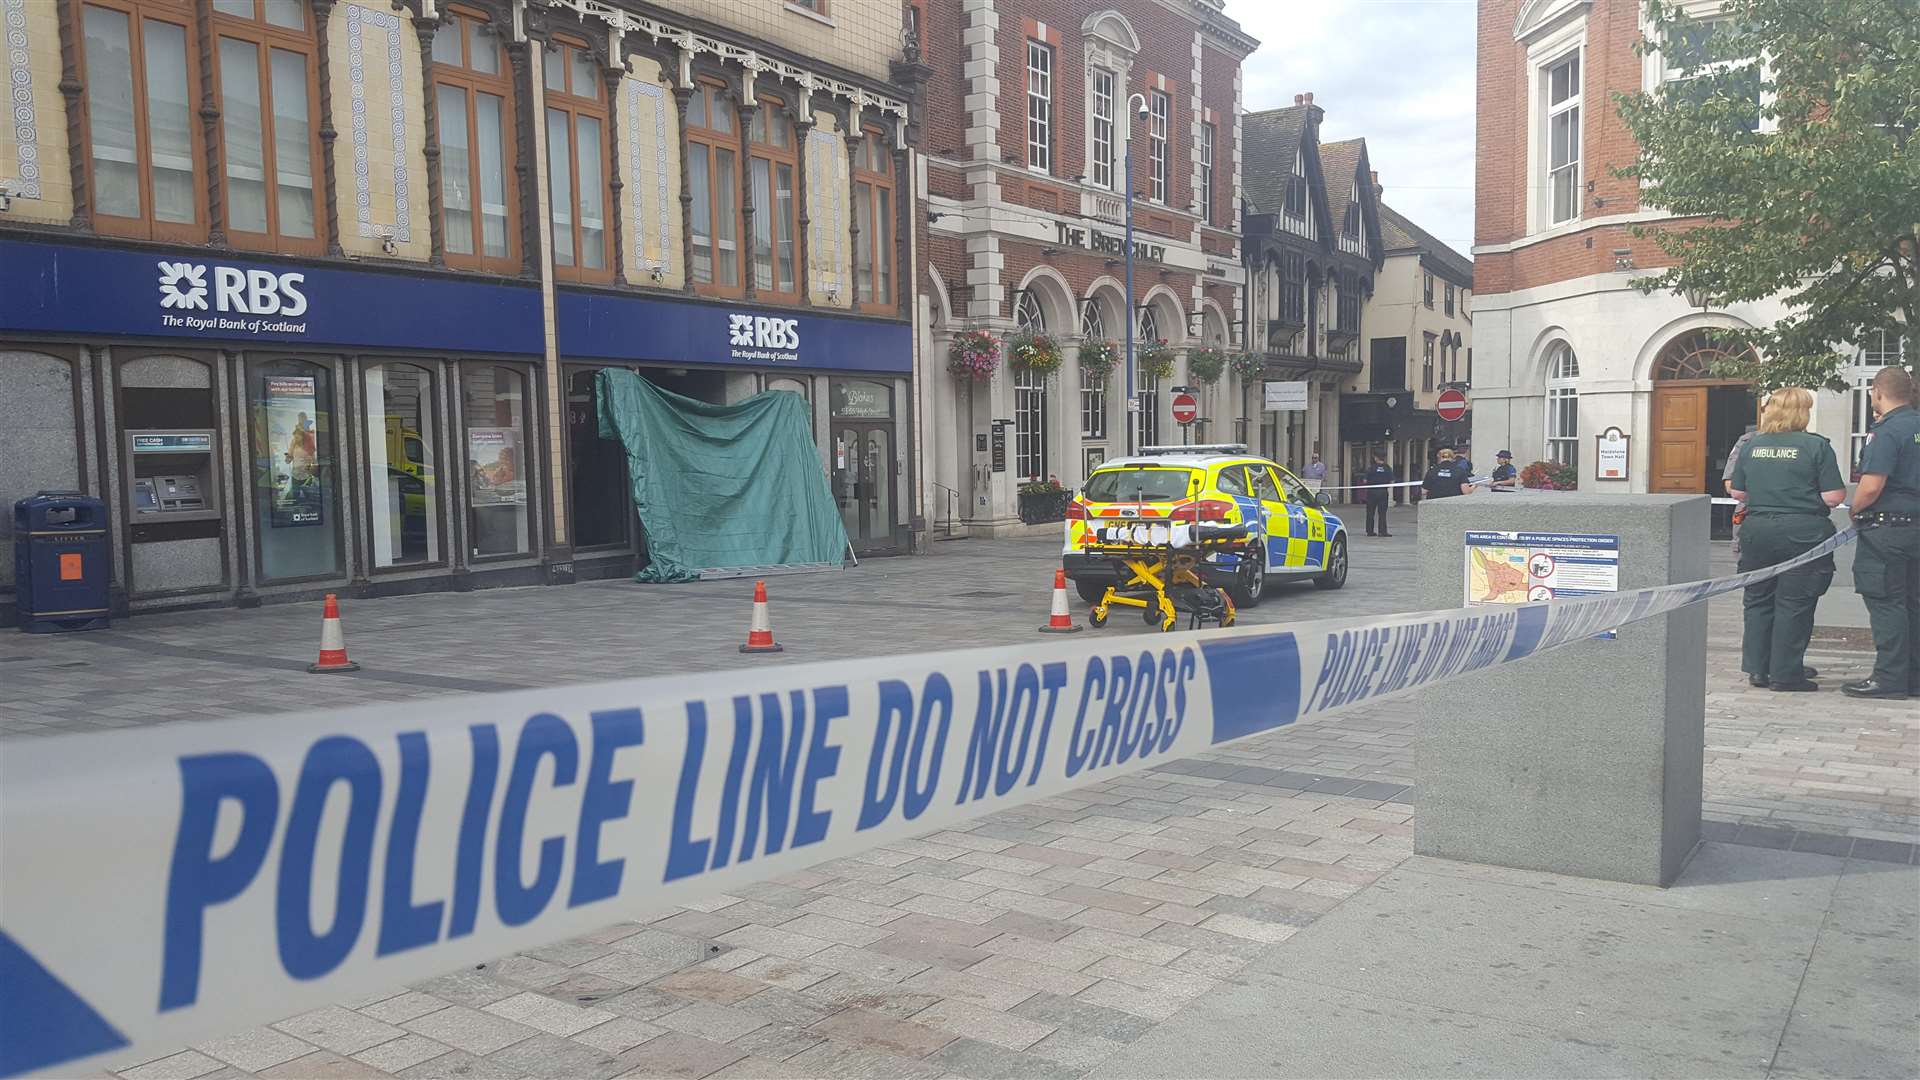 Police cordon outside RBS in Jubilee Square Maidstone after a homeless man was found dead